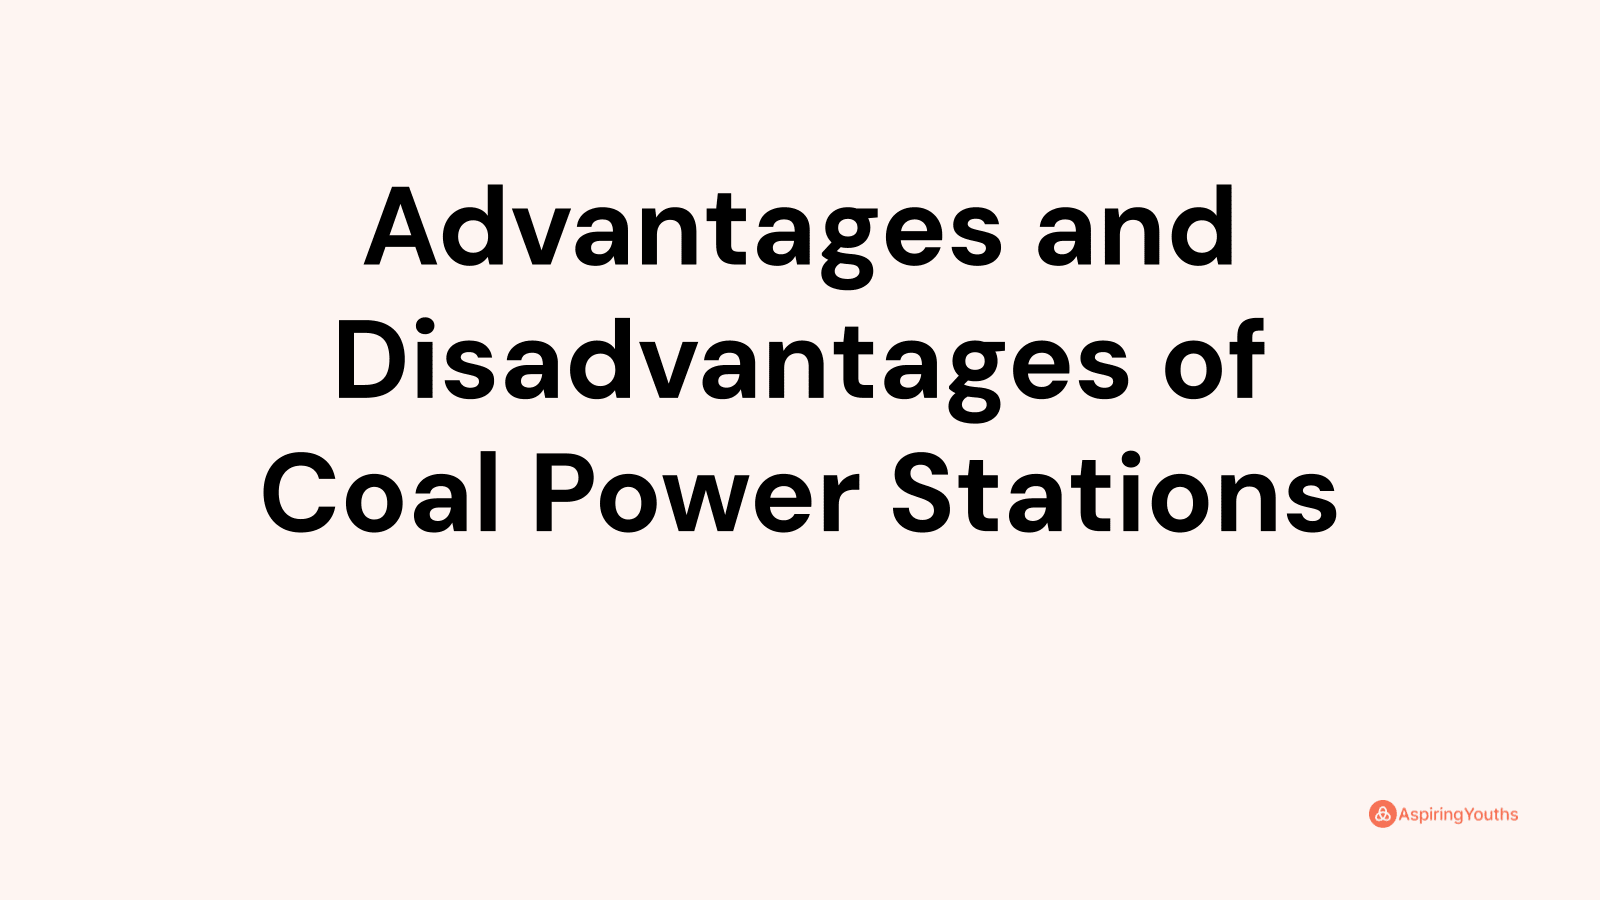 Advantages and disadvantages of Coal Power Stations